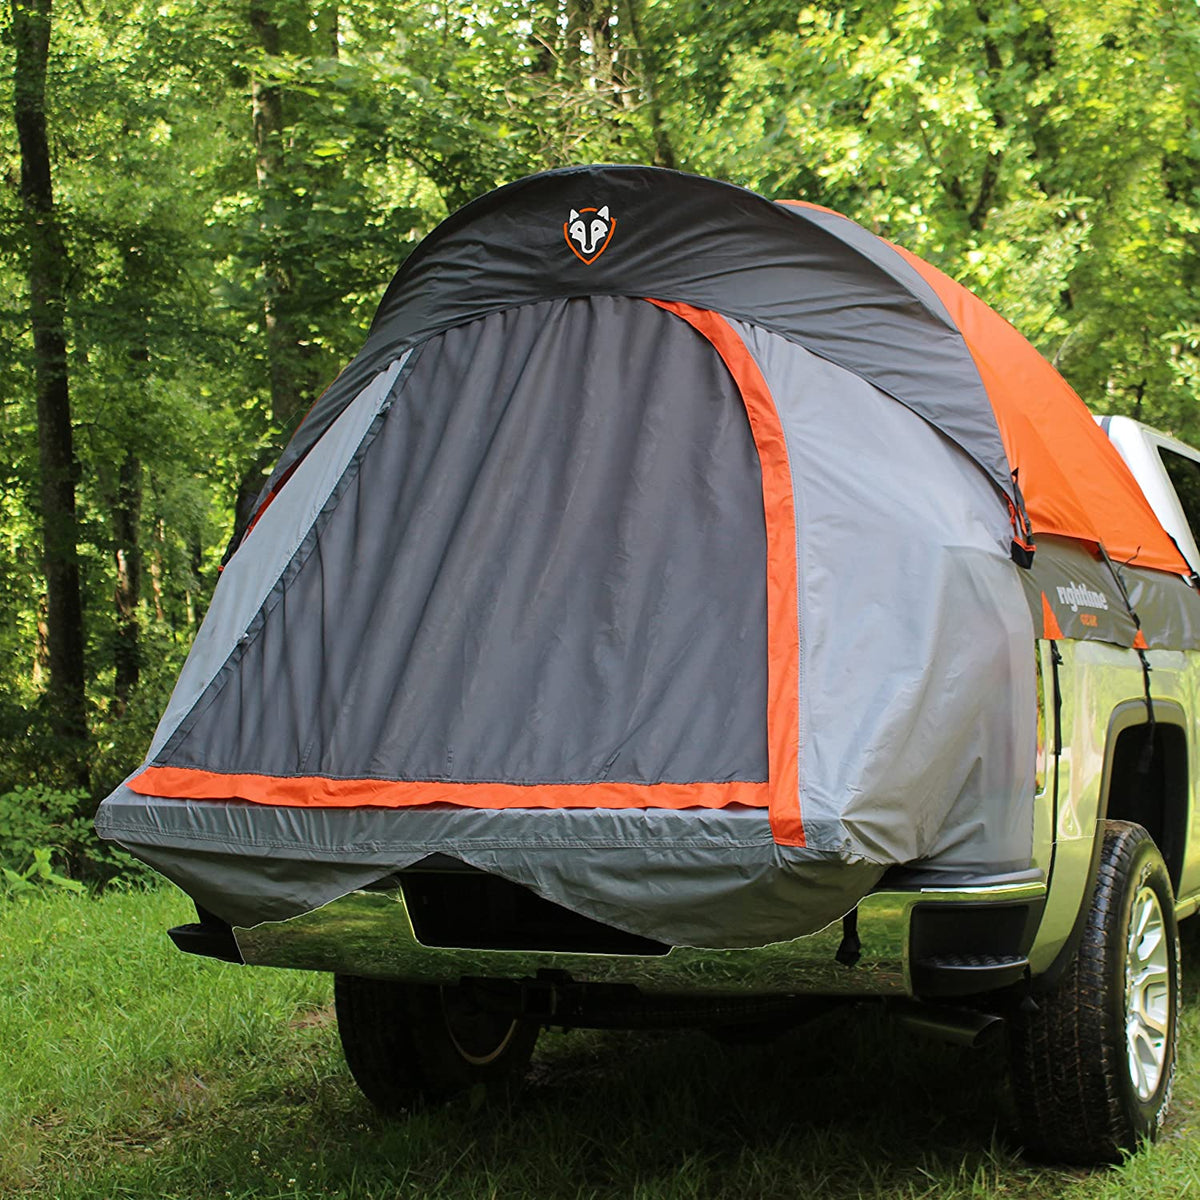 Rightline Gear 2-Person Truck Bed Tent